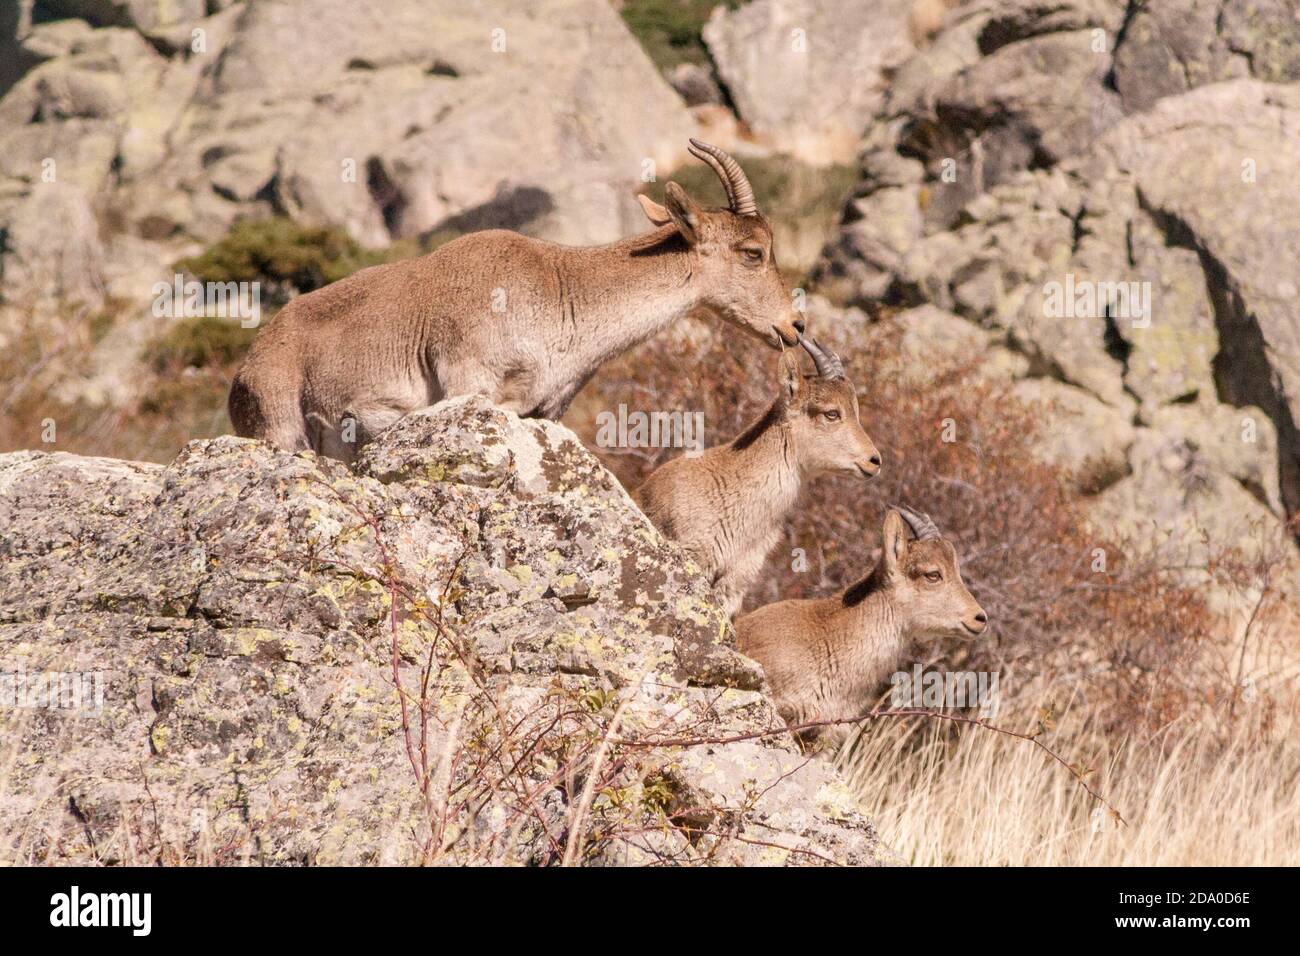 P.N. de Guadarrama, Madrid, Spain. Female wild mountain goat with two baby goats in summer rocky landscape. Stock Photo